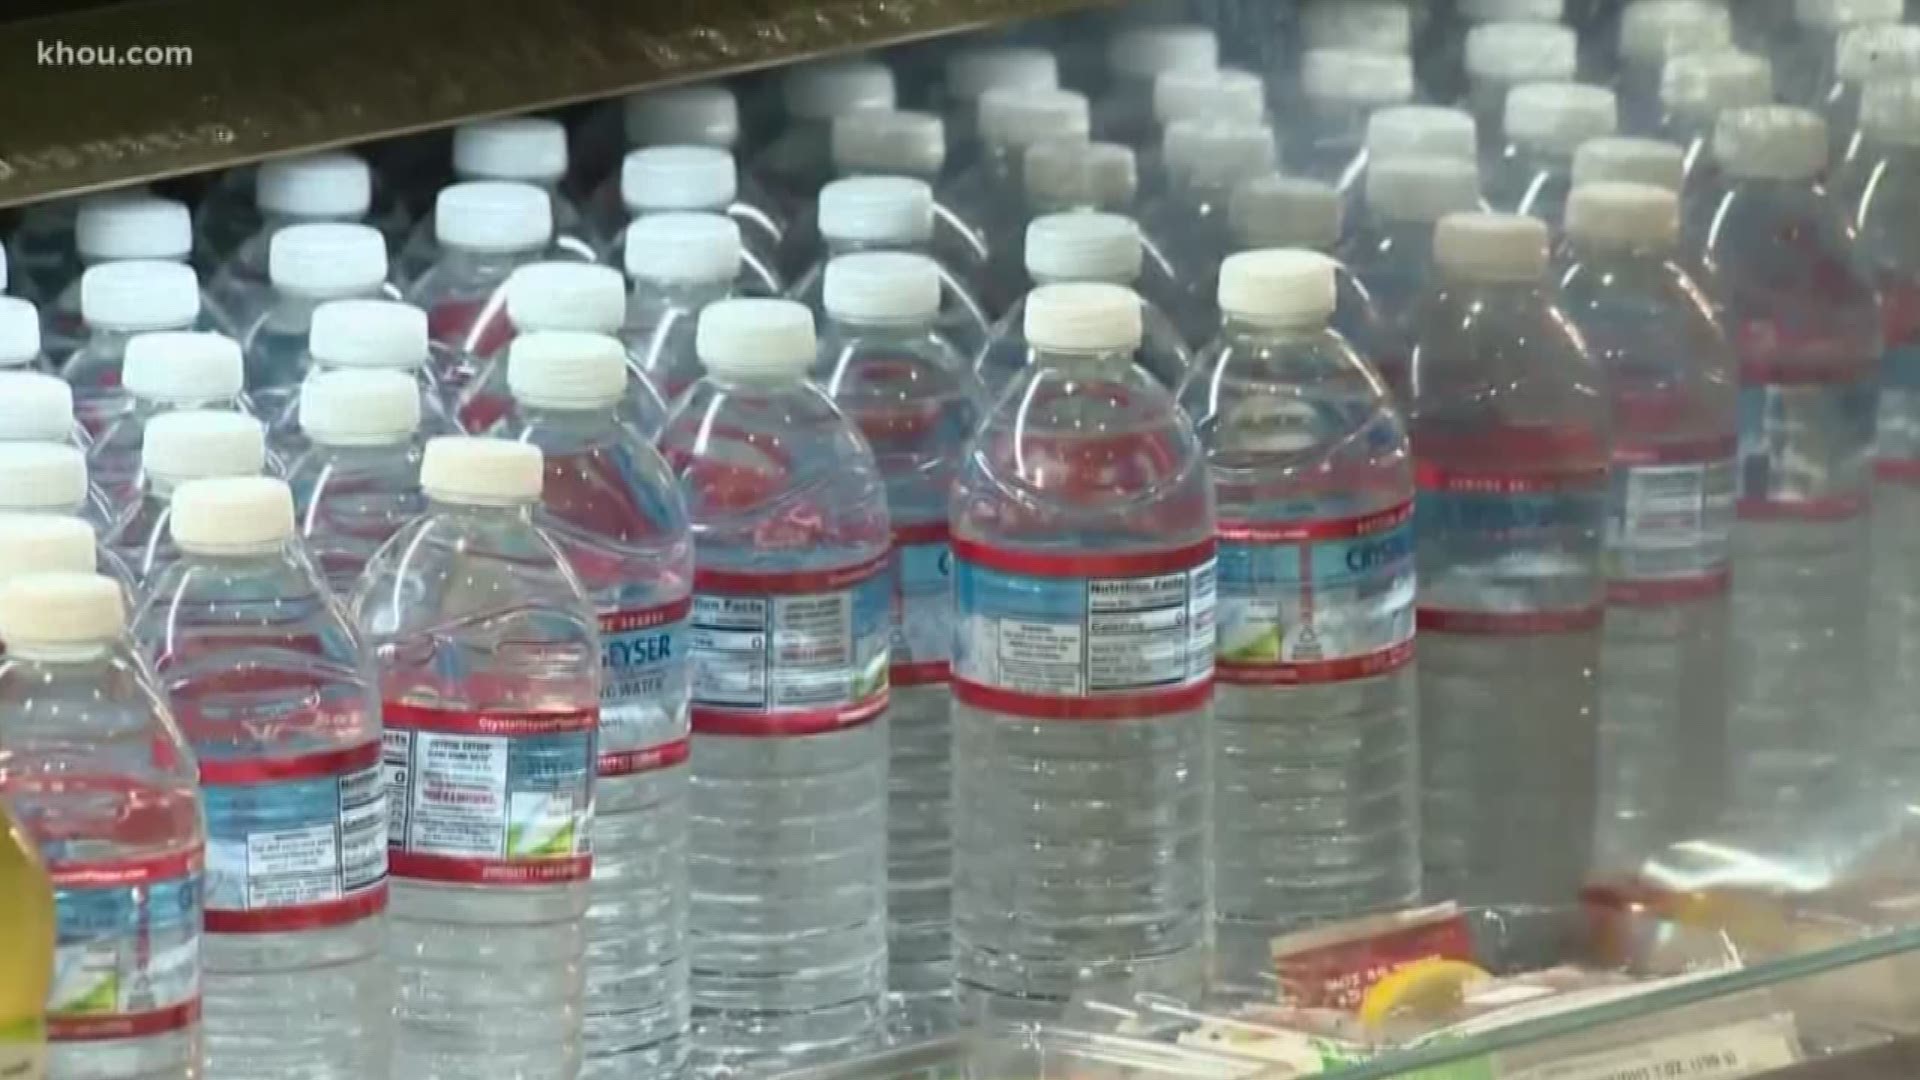 San Francisco's airport is banning the use of single-use water bottles, affecting millions of travelers.